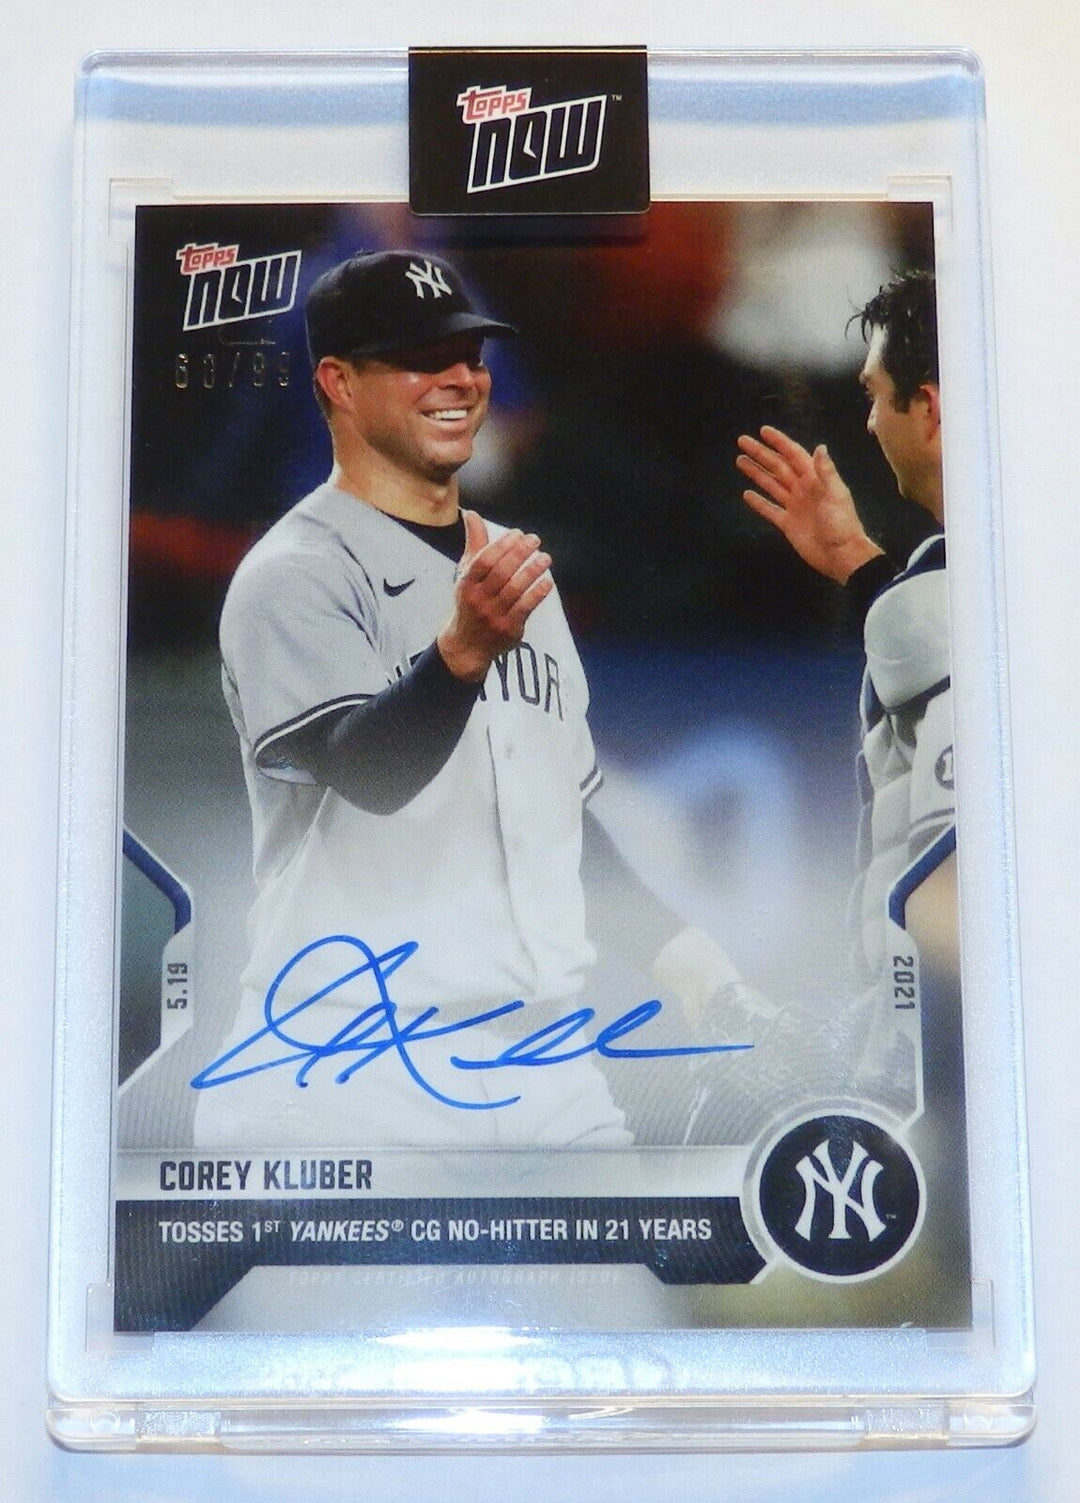 COREY KLUBER AUTOGRAPHED FIRST YANKEES NO HITTER IN 21 YEARS TOPPS NOW CARD 235A Image 4